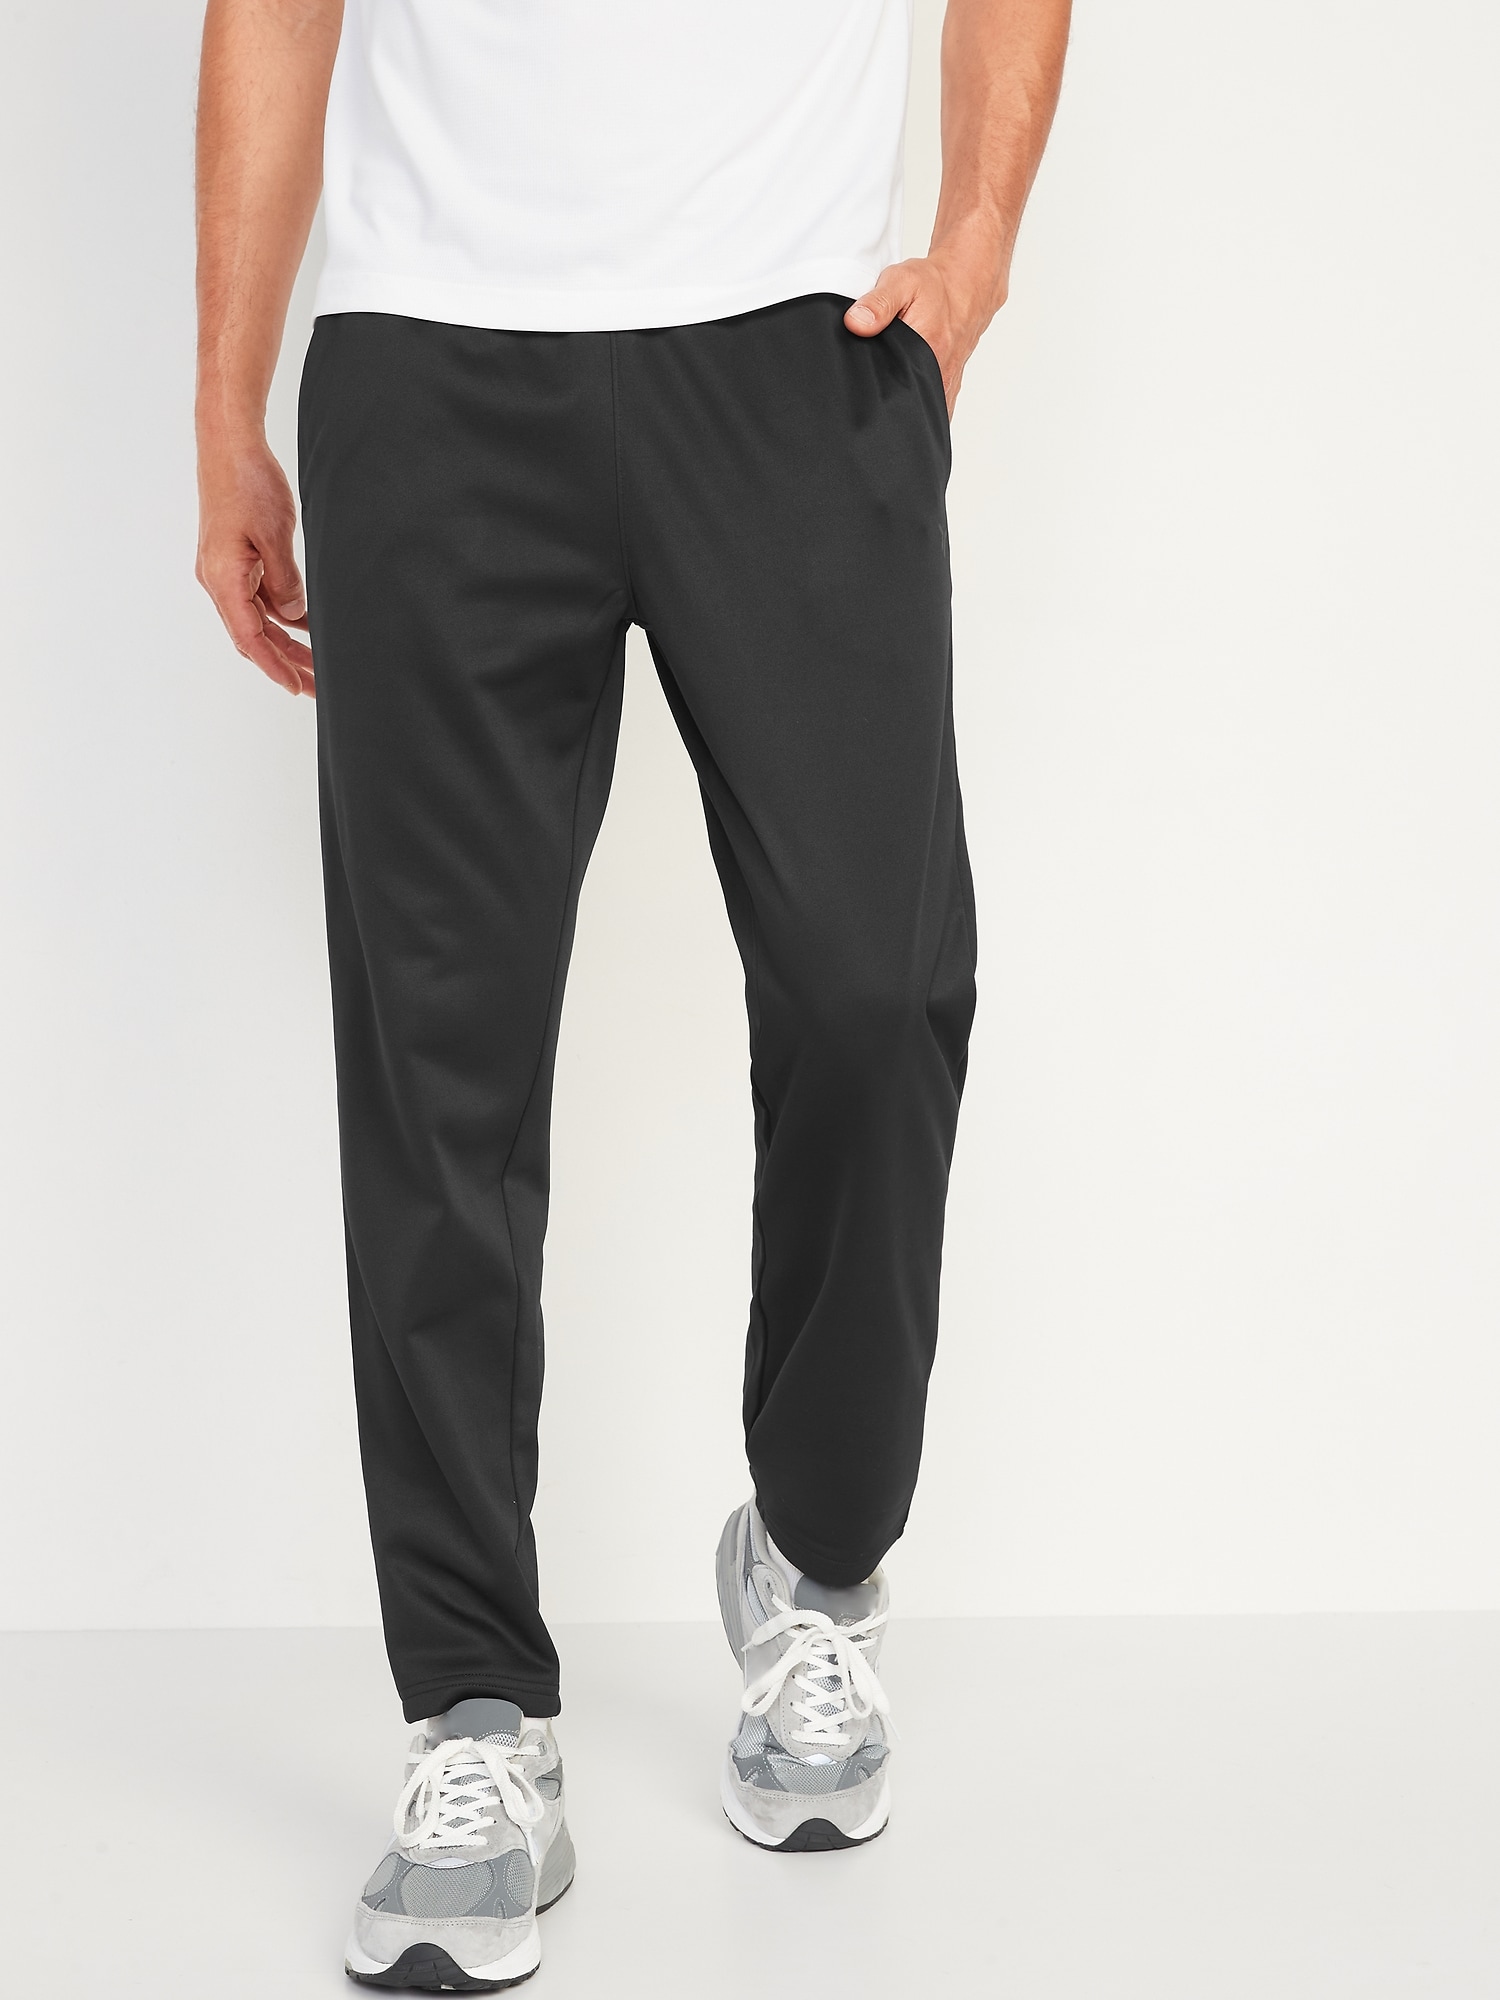 Old Navy Go-Dry Tapered Performance Sweatpants for Men black. 1